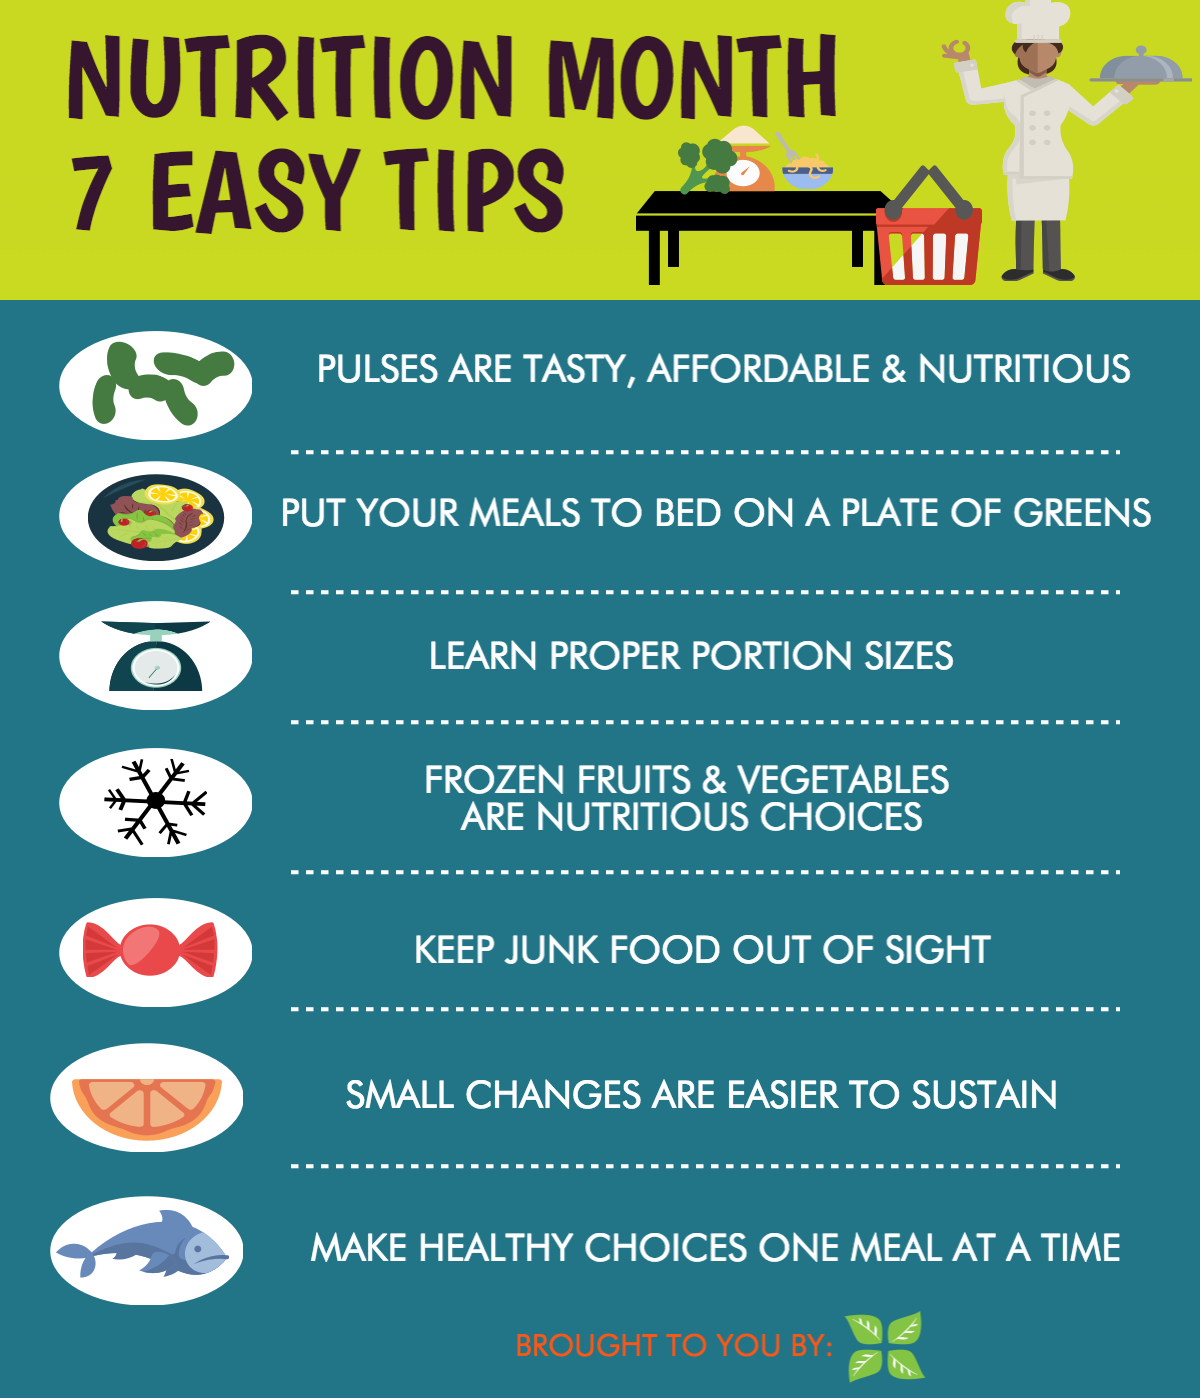 Nutrition tips